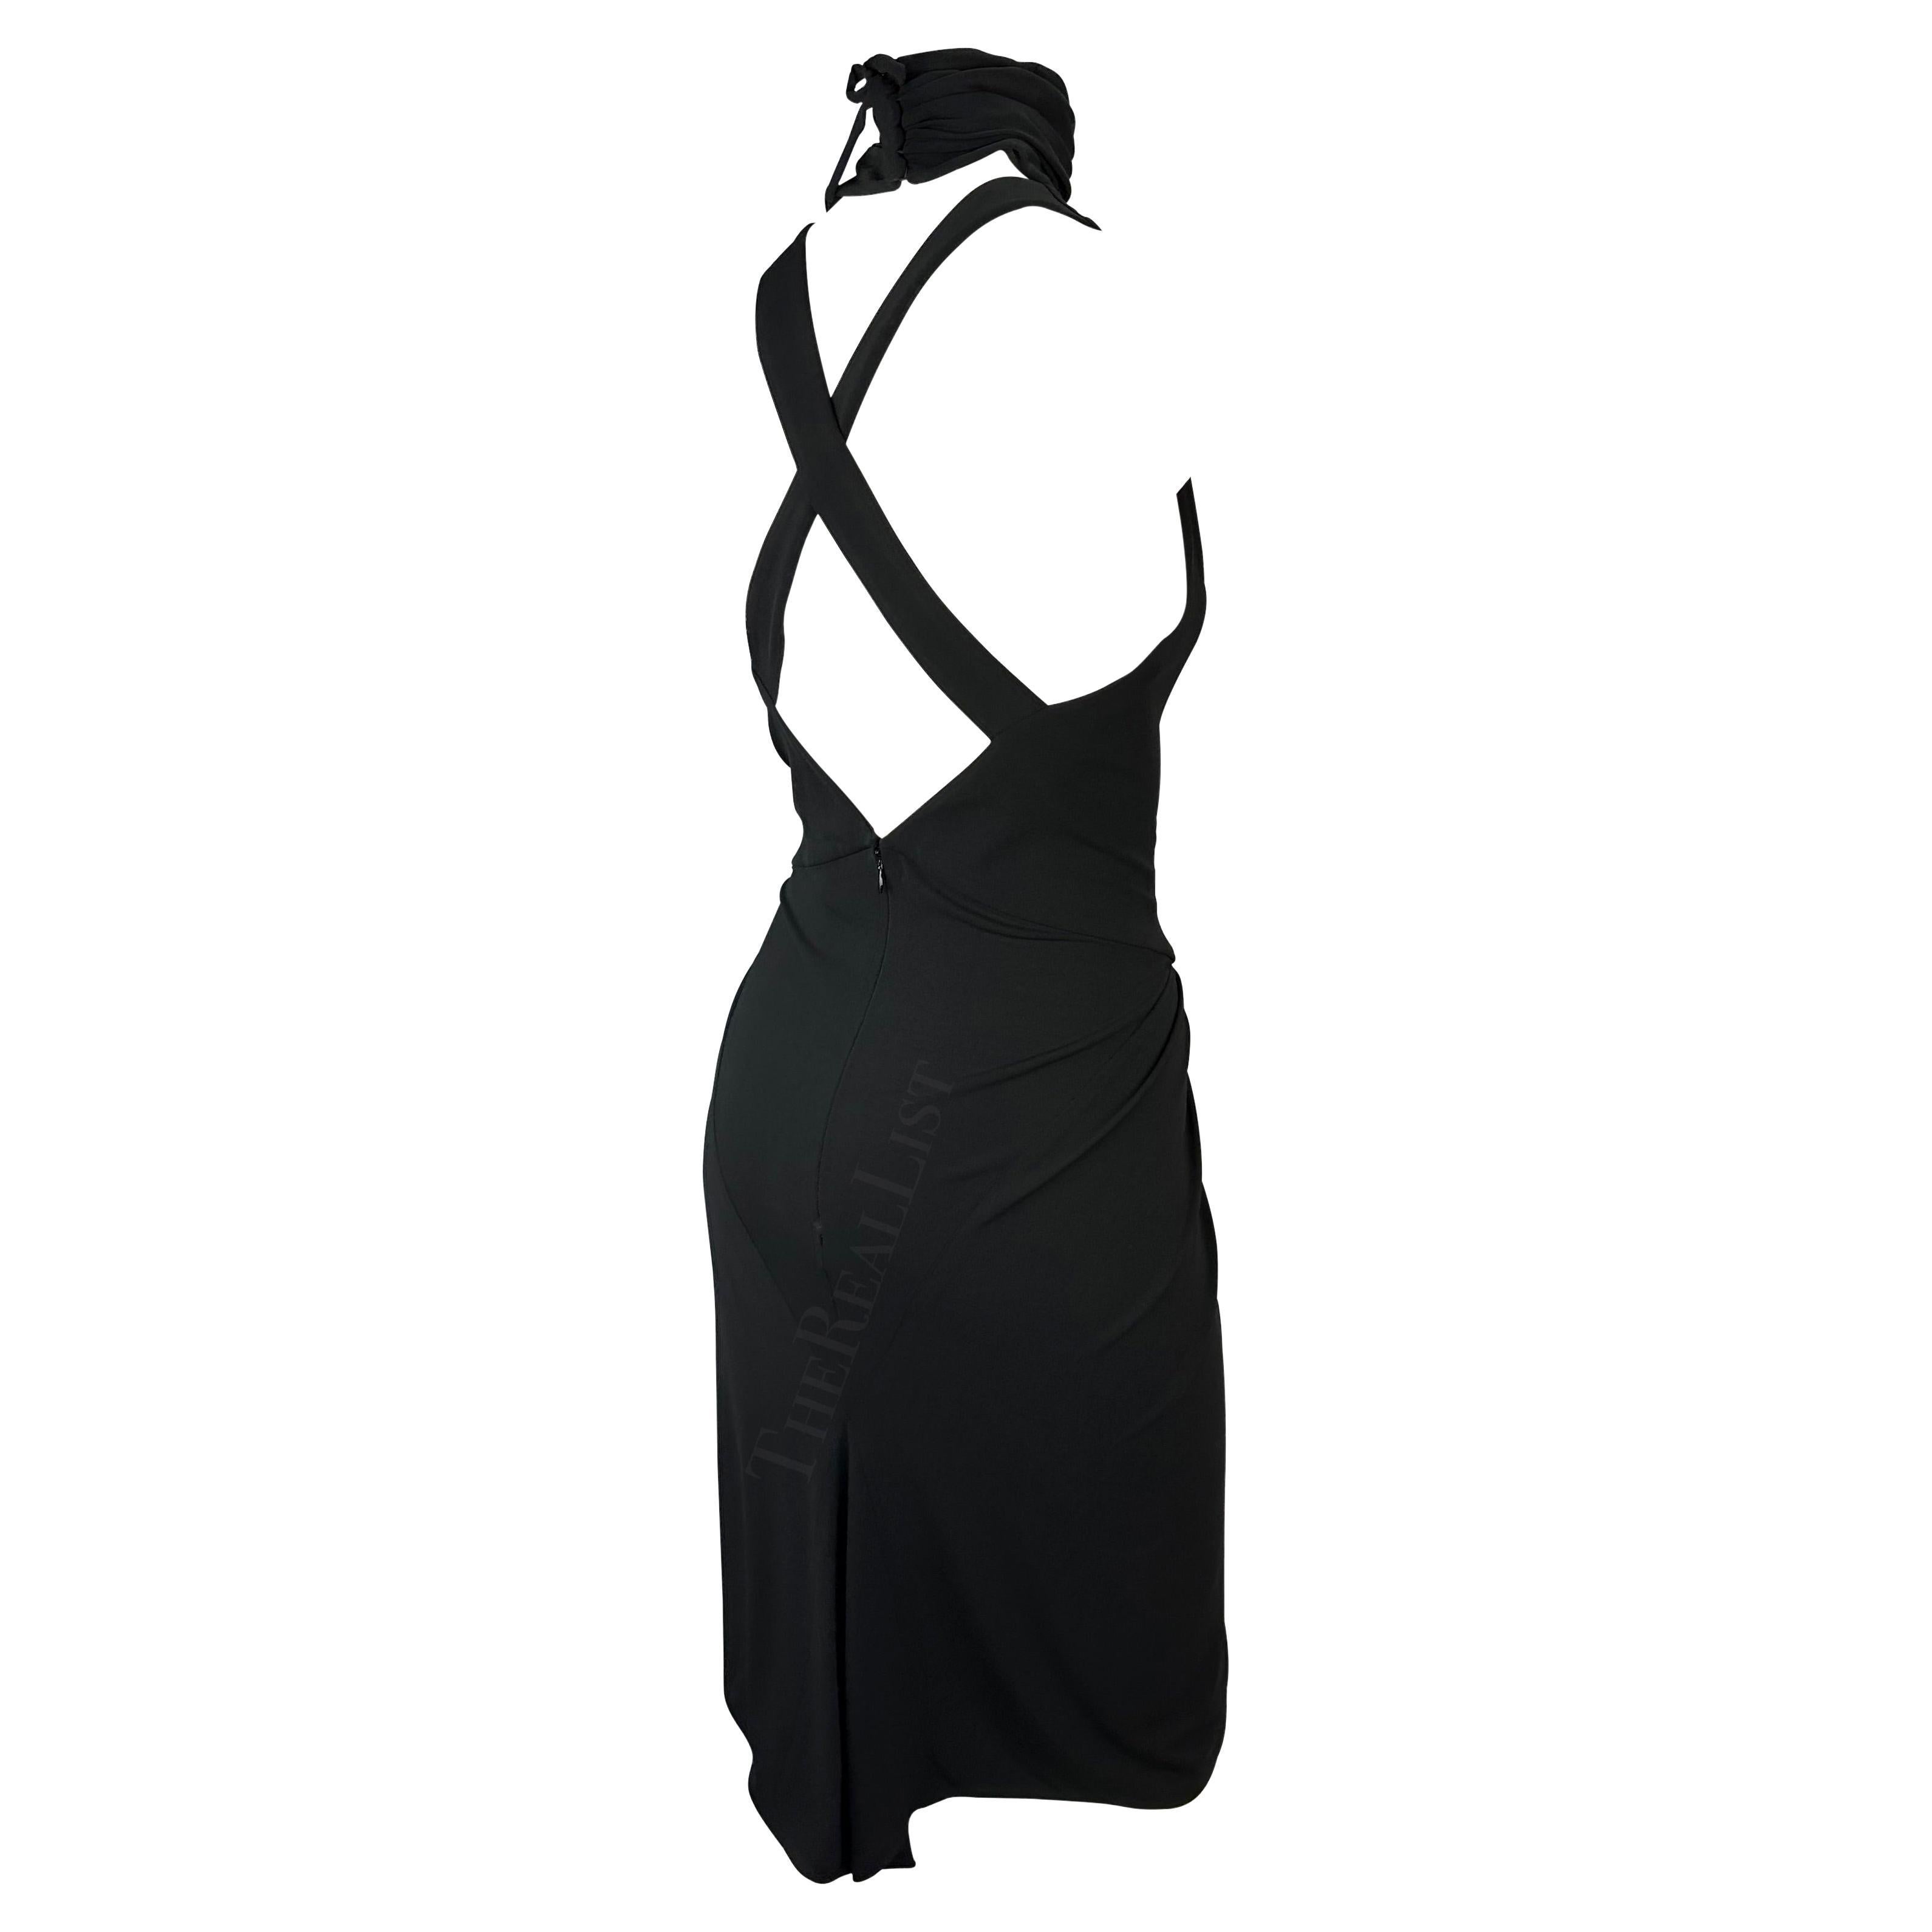 S/S 2003 Karl Lagerfeld Gallery Runway Black Backless Ruched Midi Dress For Sale